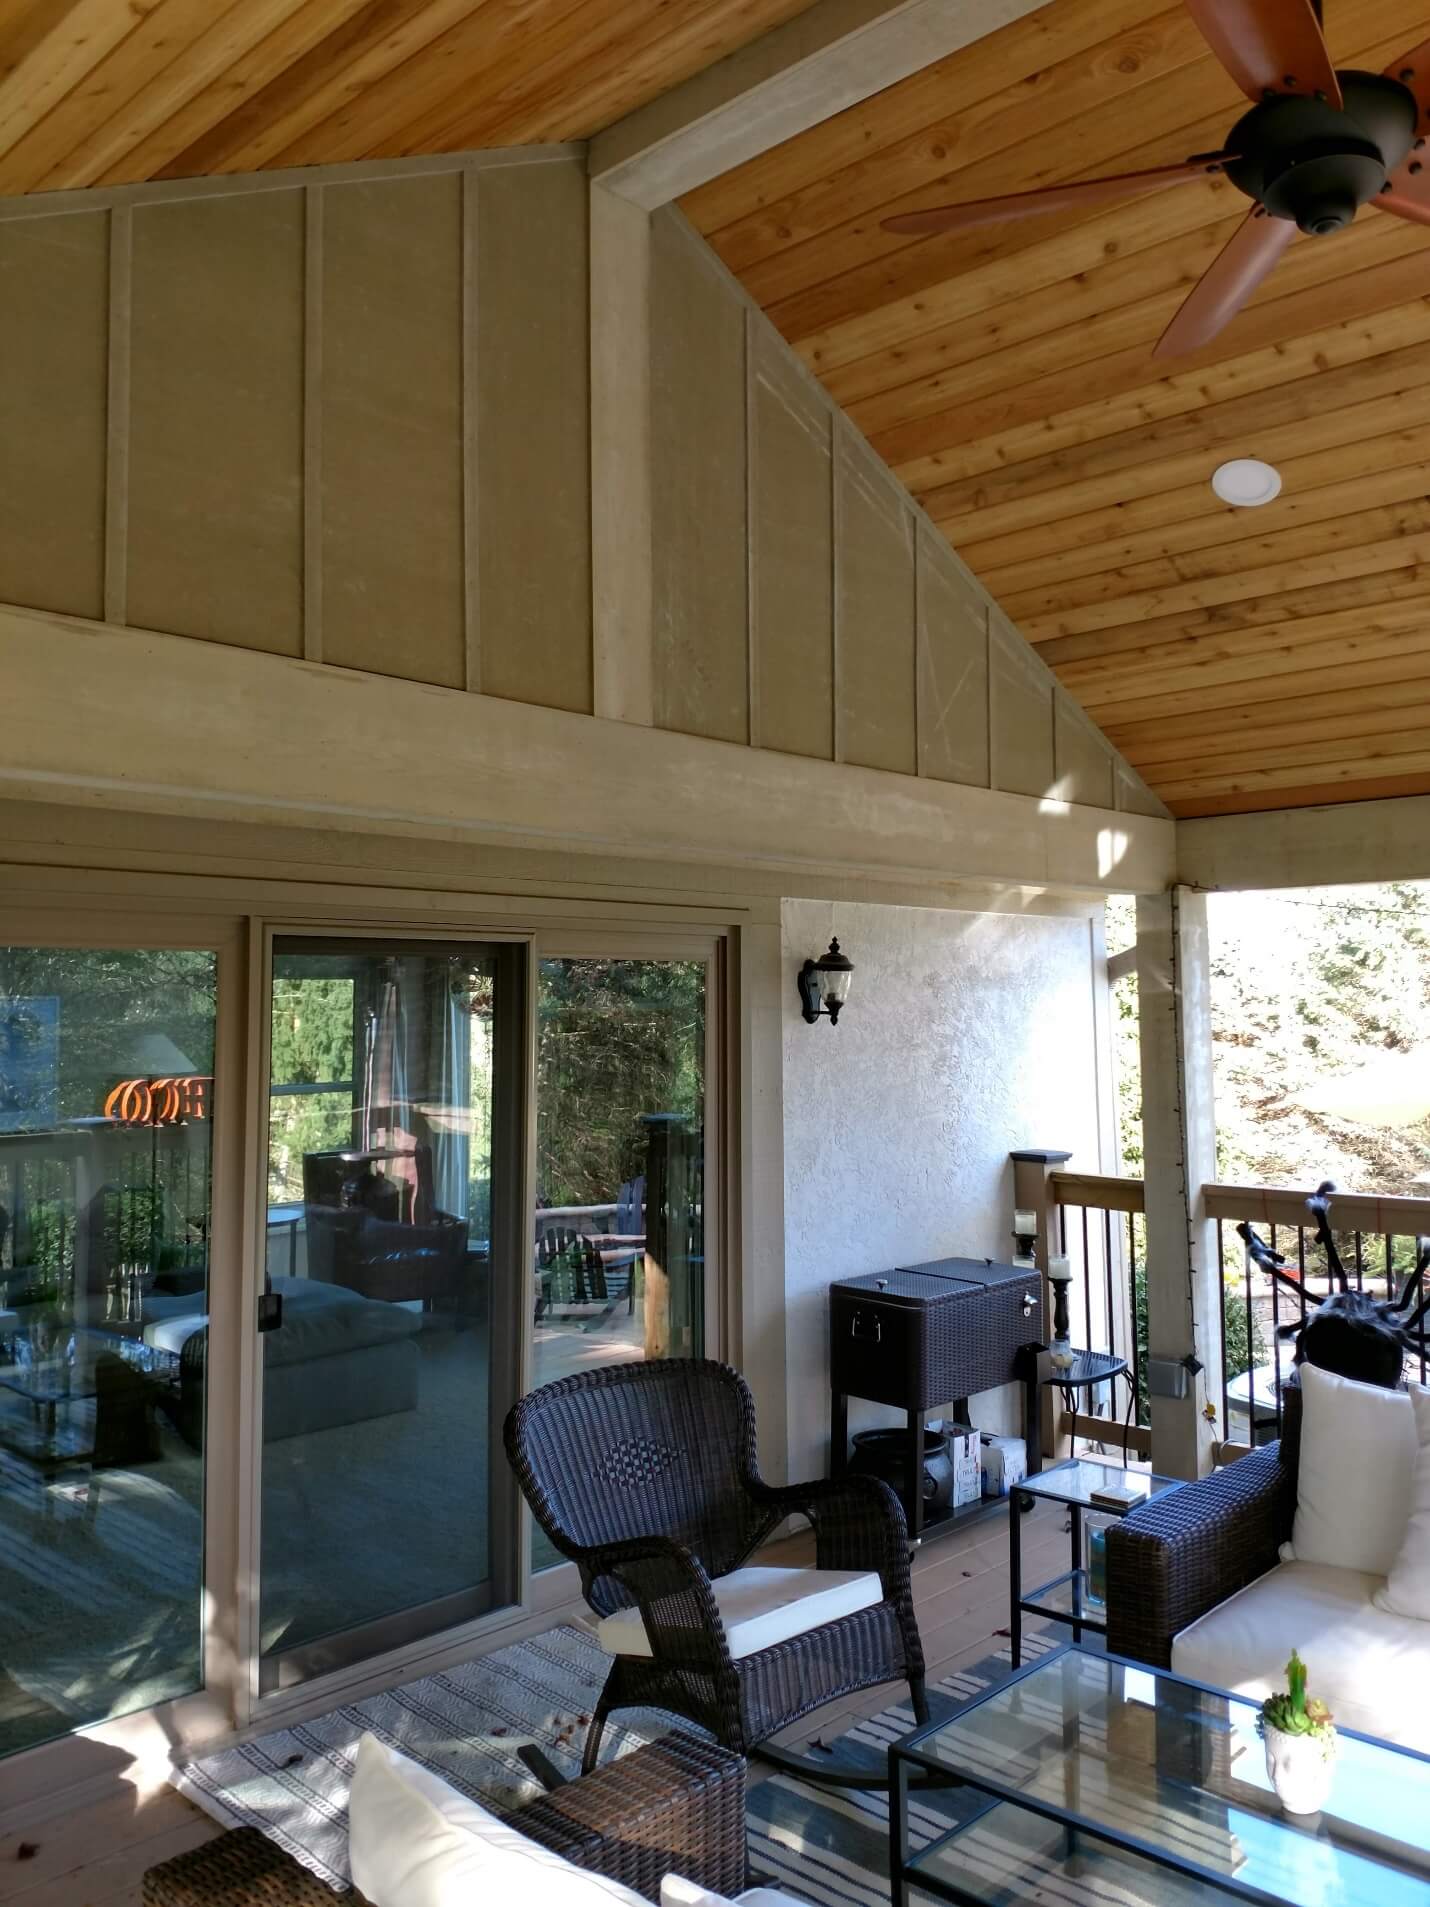 Covered porch seating area and sliding door